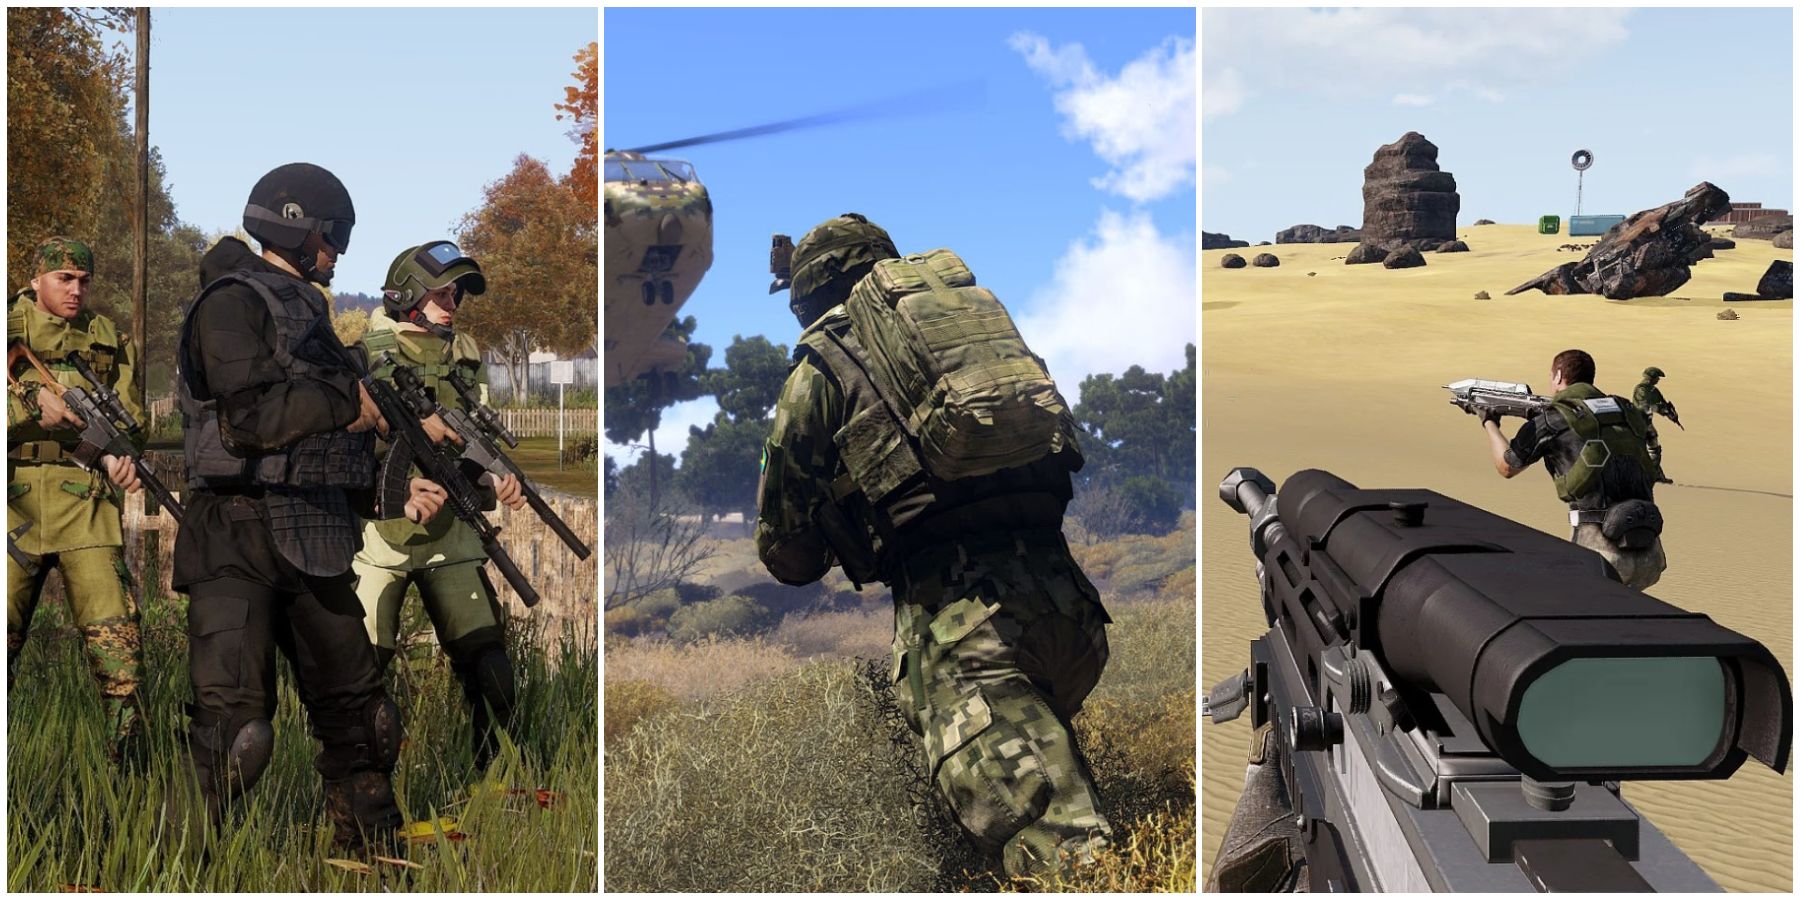 things that hold up well about arma 3